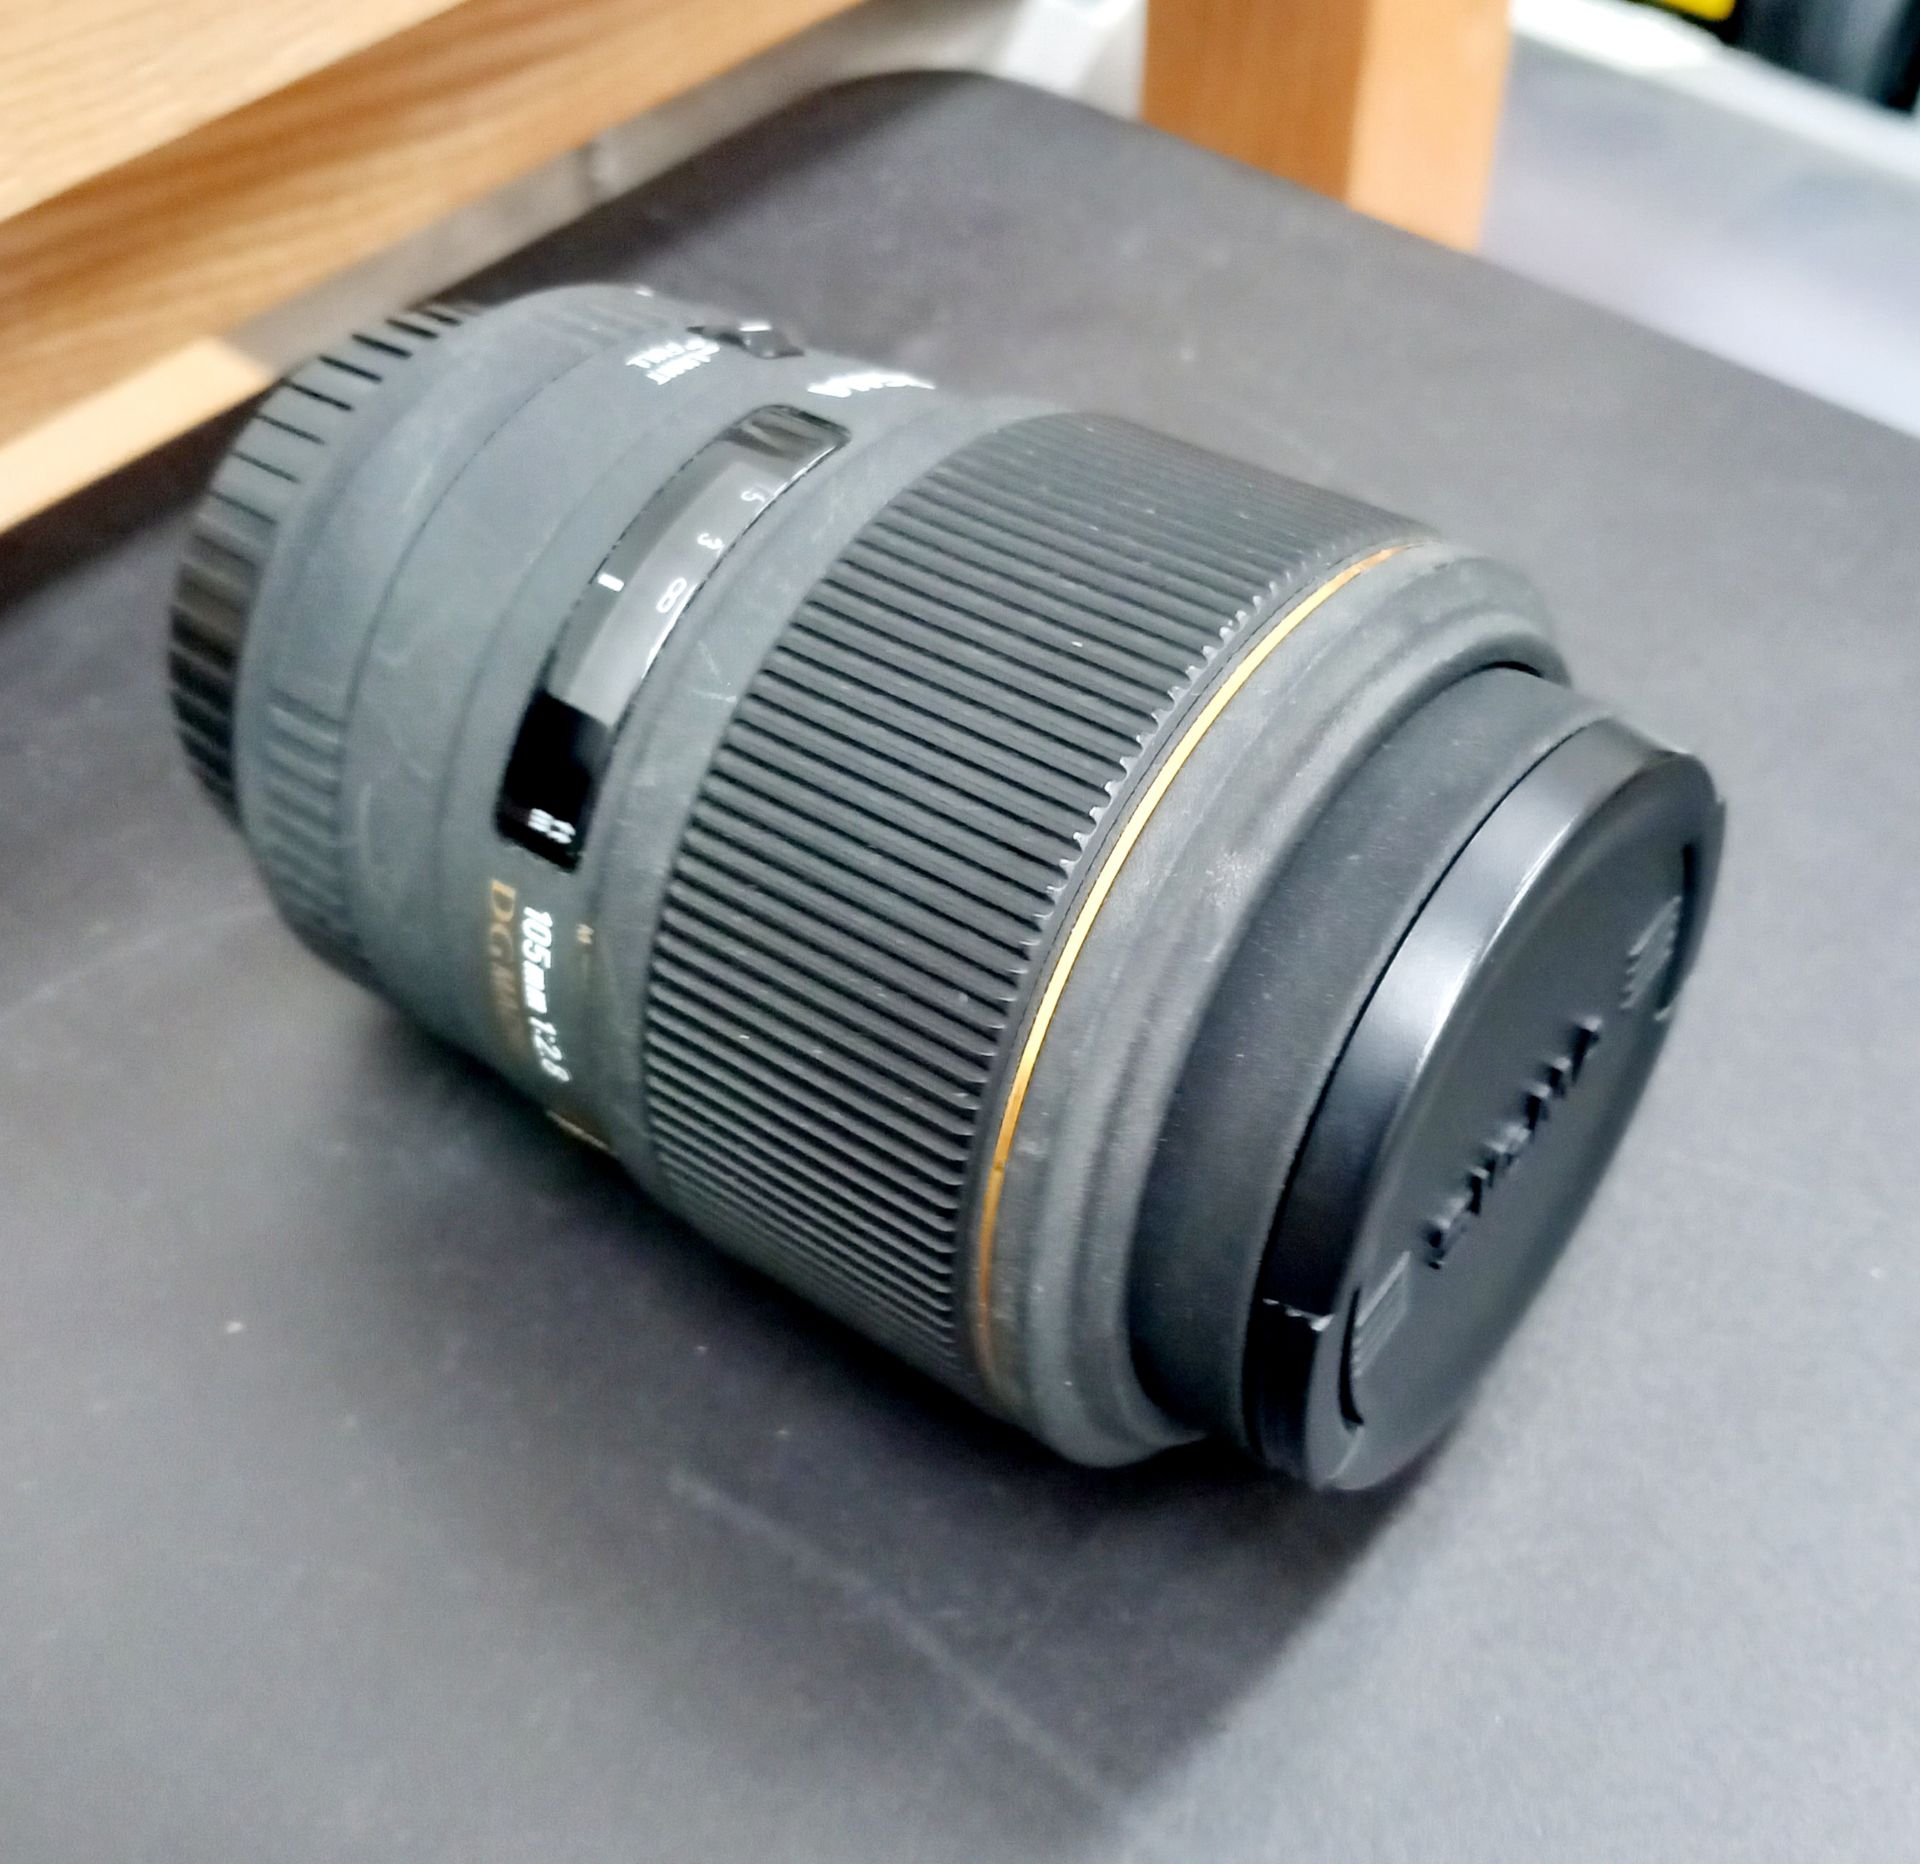 Sigma 105mm F2.8 Macro Canon Fit - Image 2 of 2